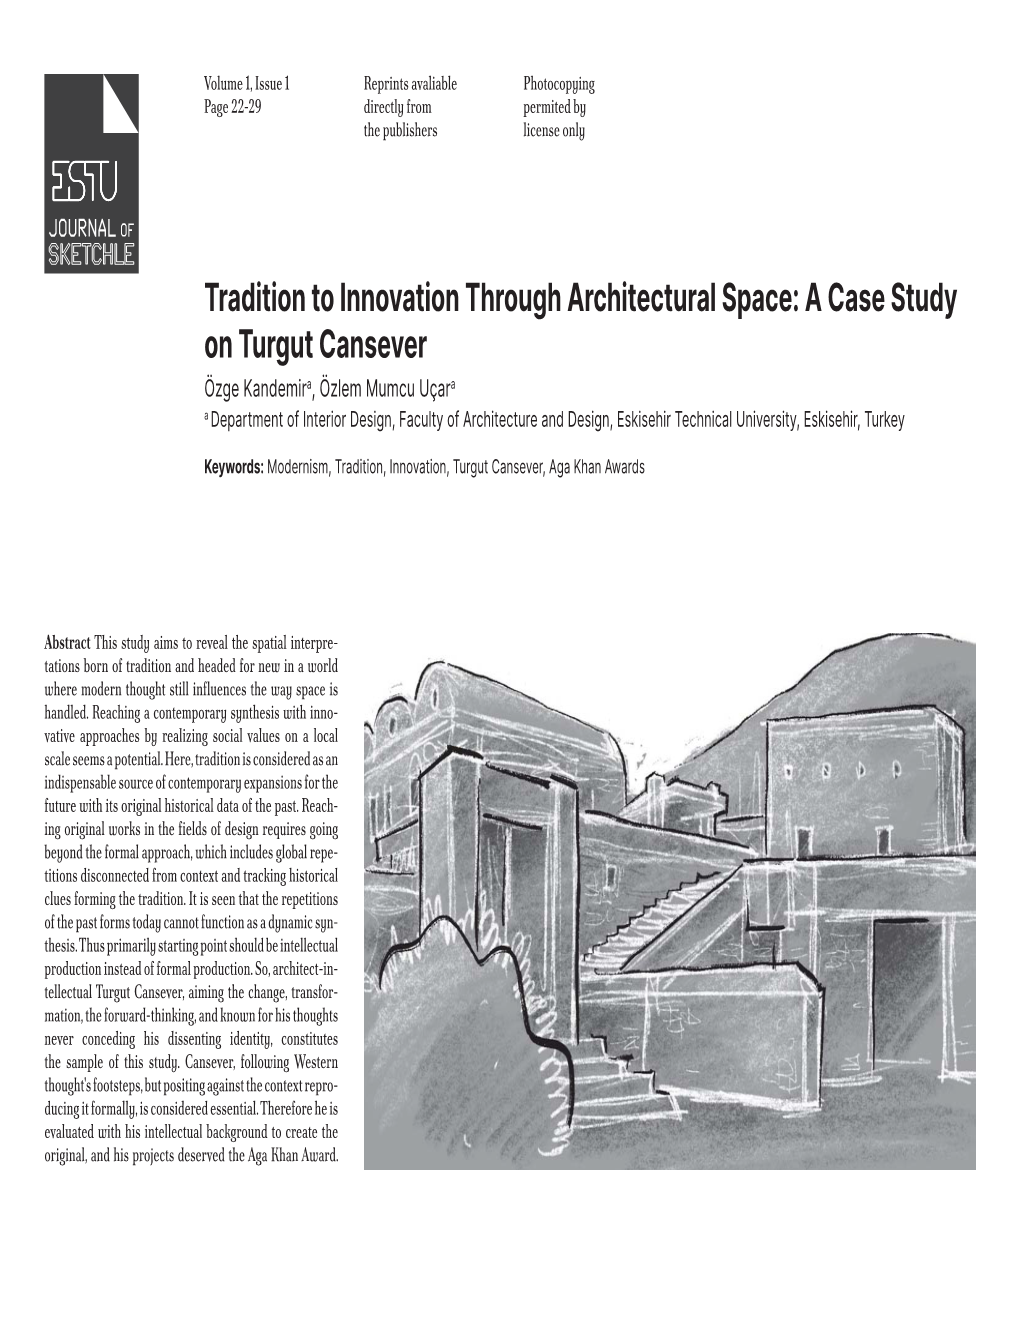 Tradition to Innovation Through Architectural Space: a Case Study